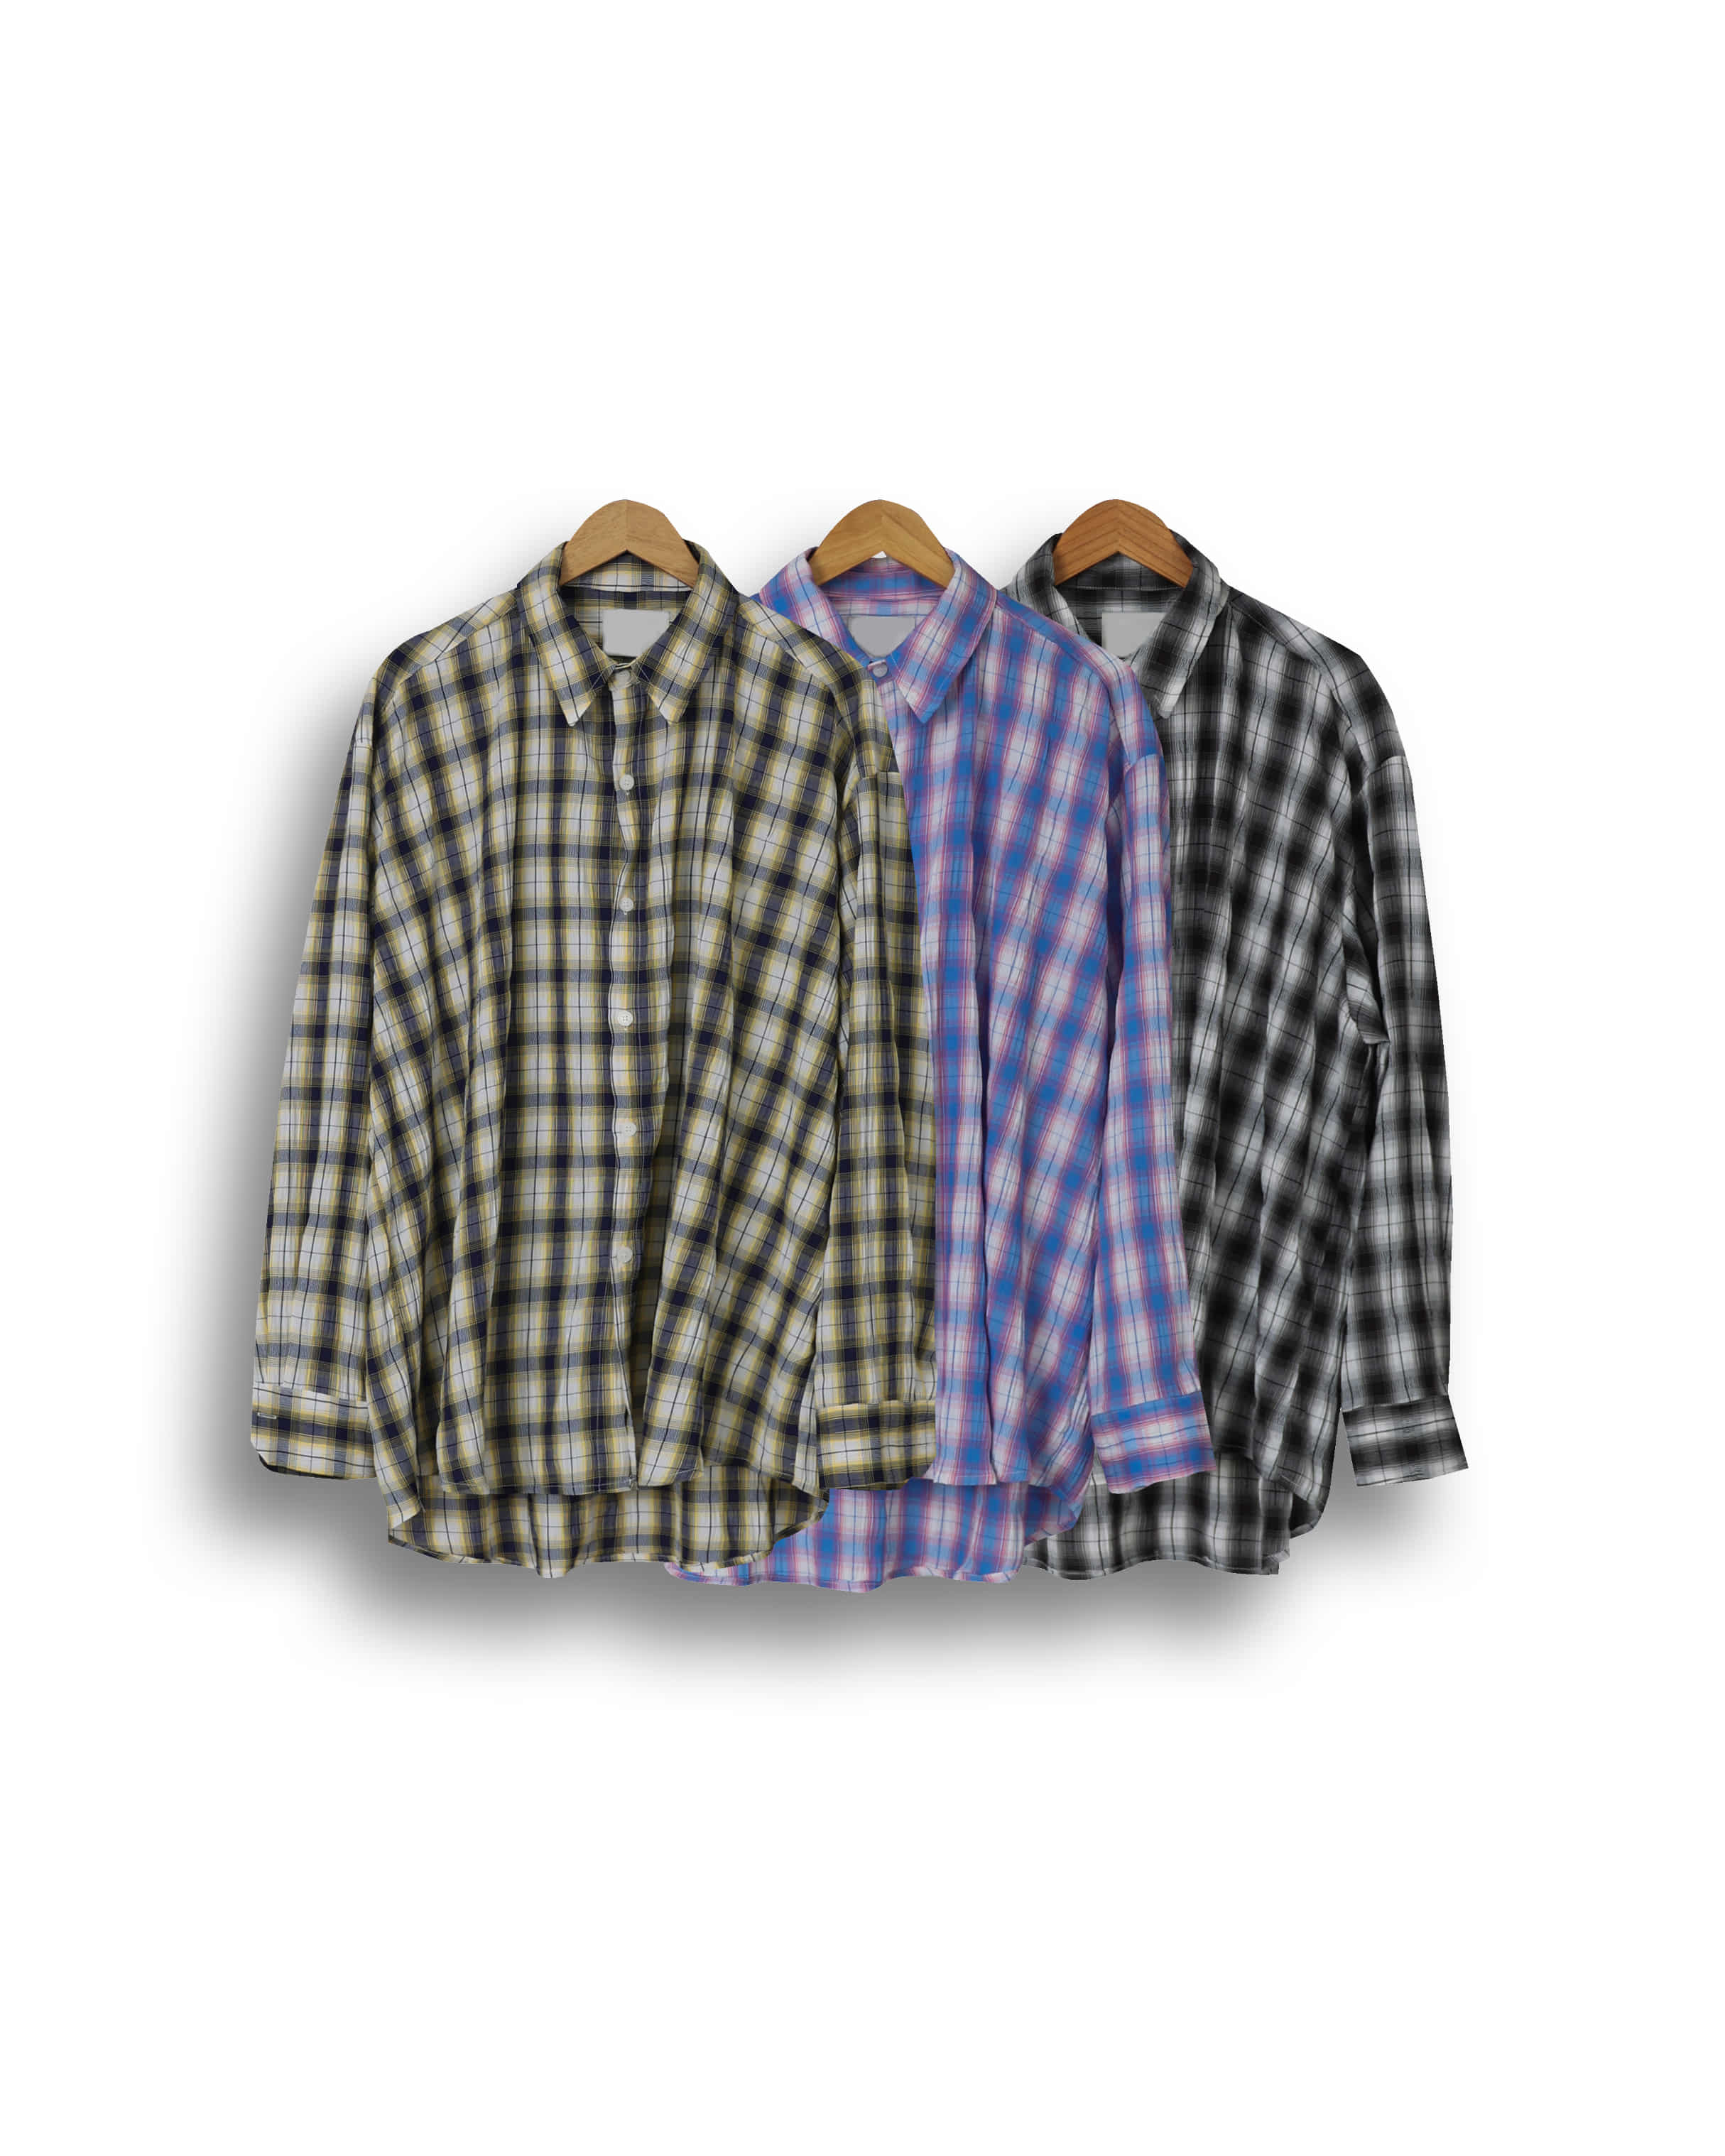 VOD Wave Oversized Check Shirts (Black/Pink/Yellow)